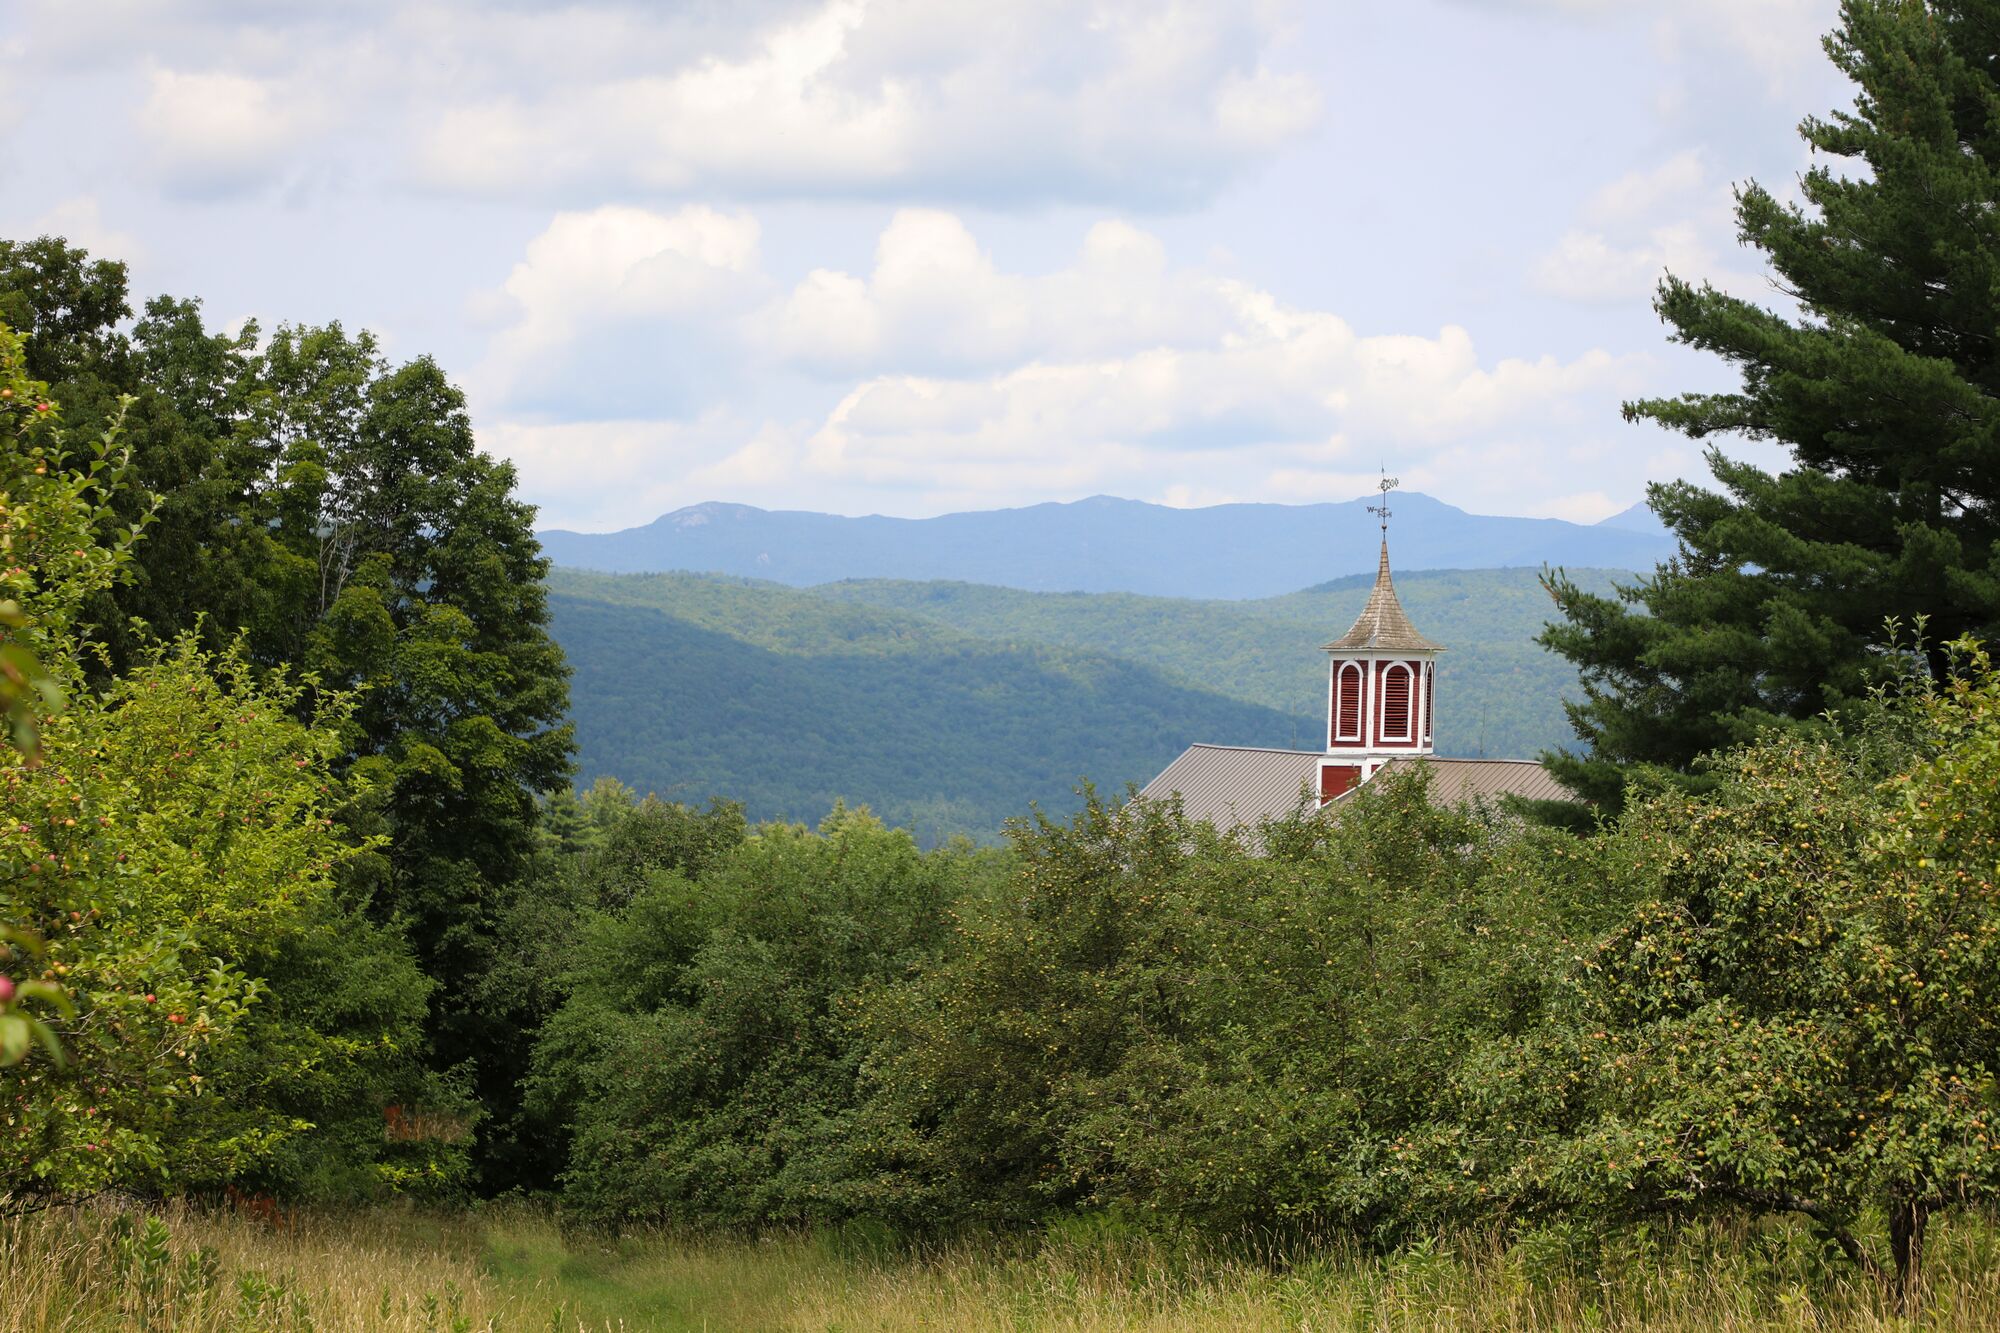 A church seen from a distance in the summer with mountains visible behind the building.